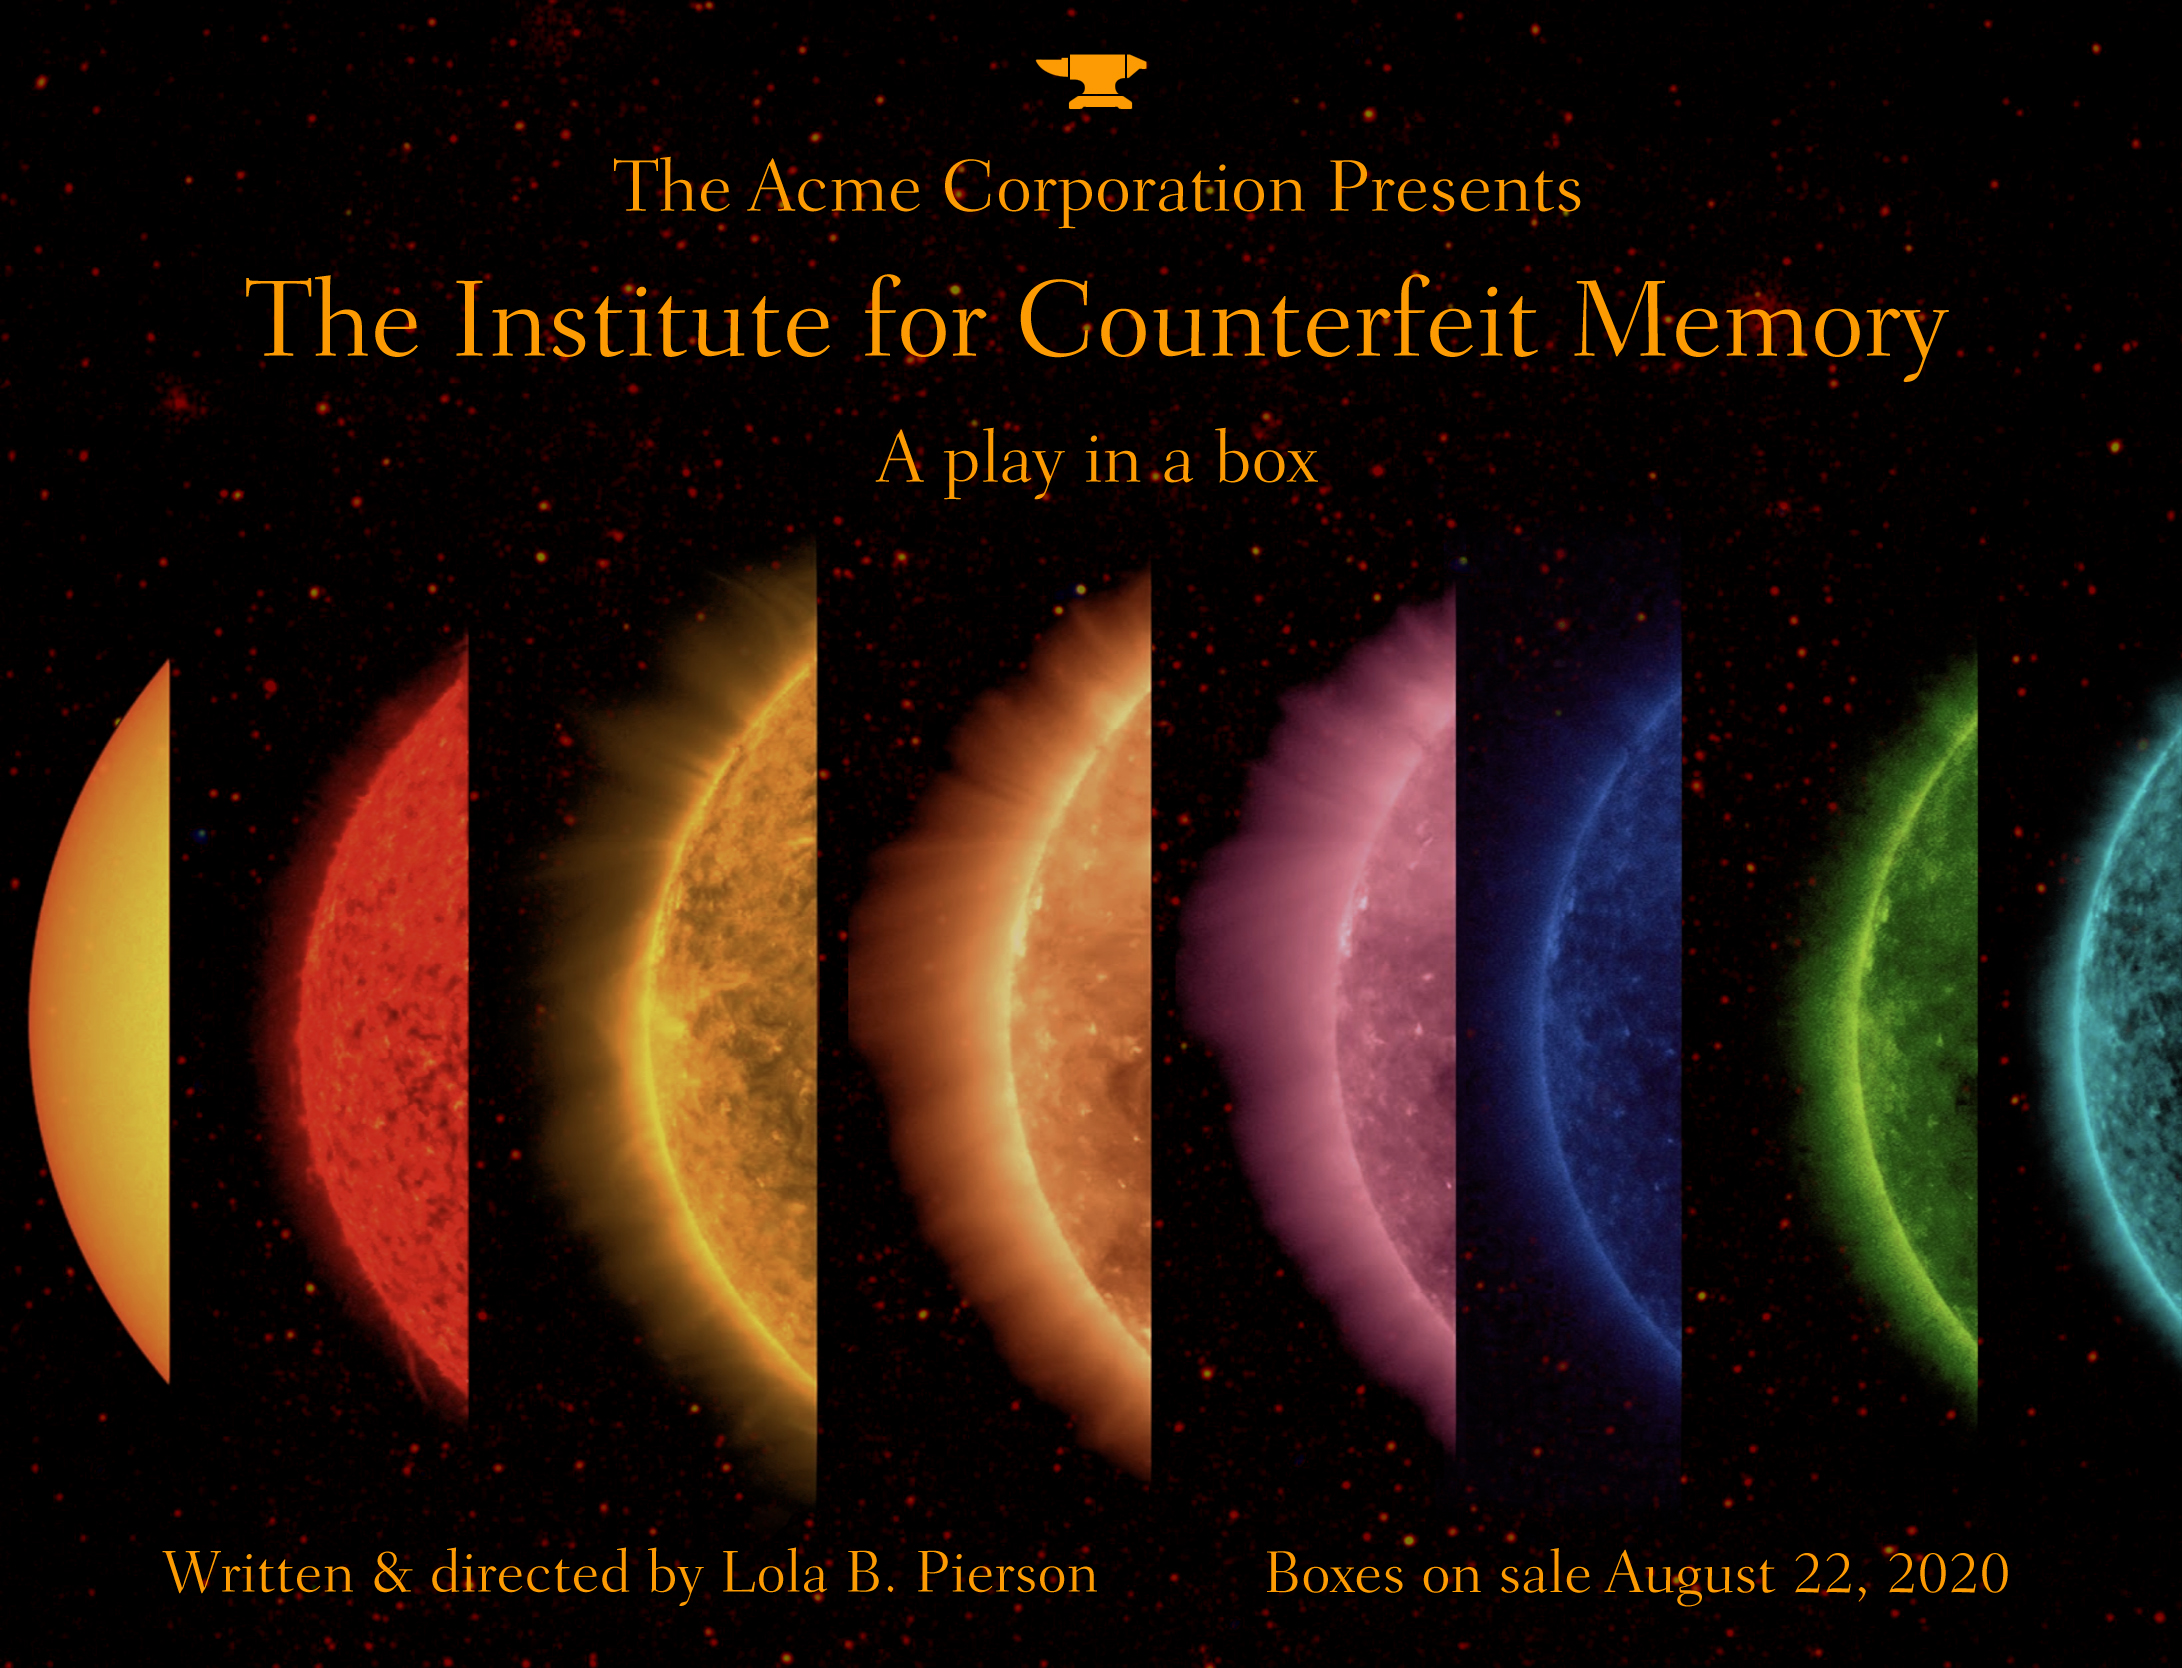 The Institute for Counterfeit Memory